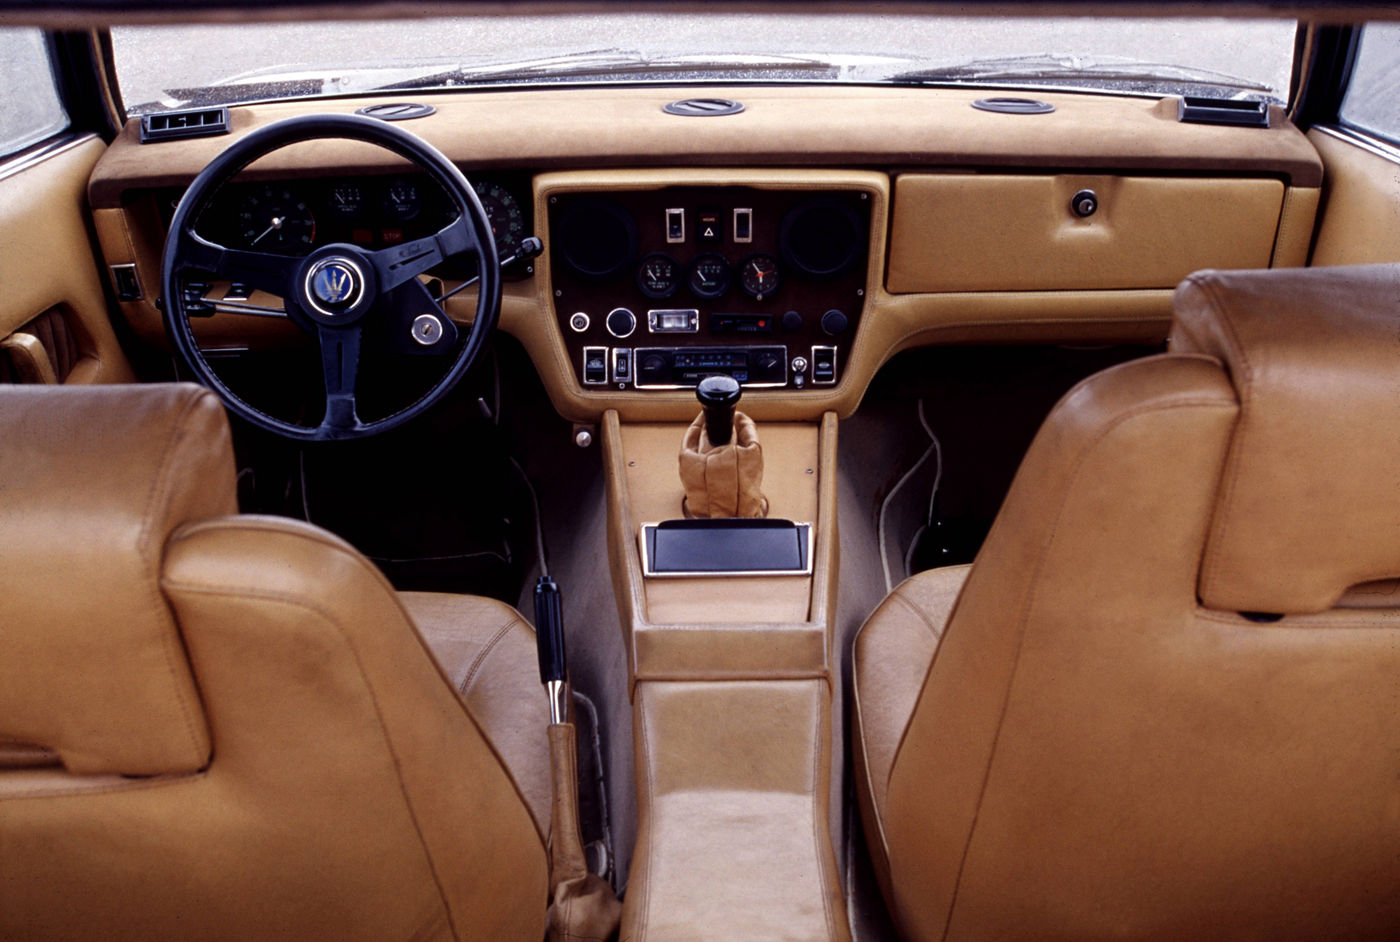 1974 Maserati Khamsin - interior view of the historical 2-door coupe